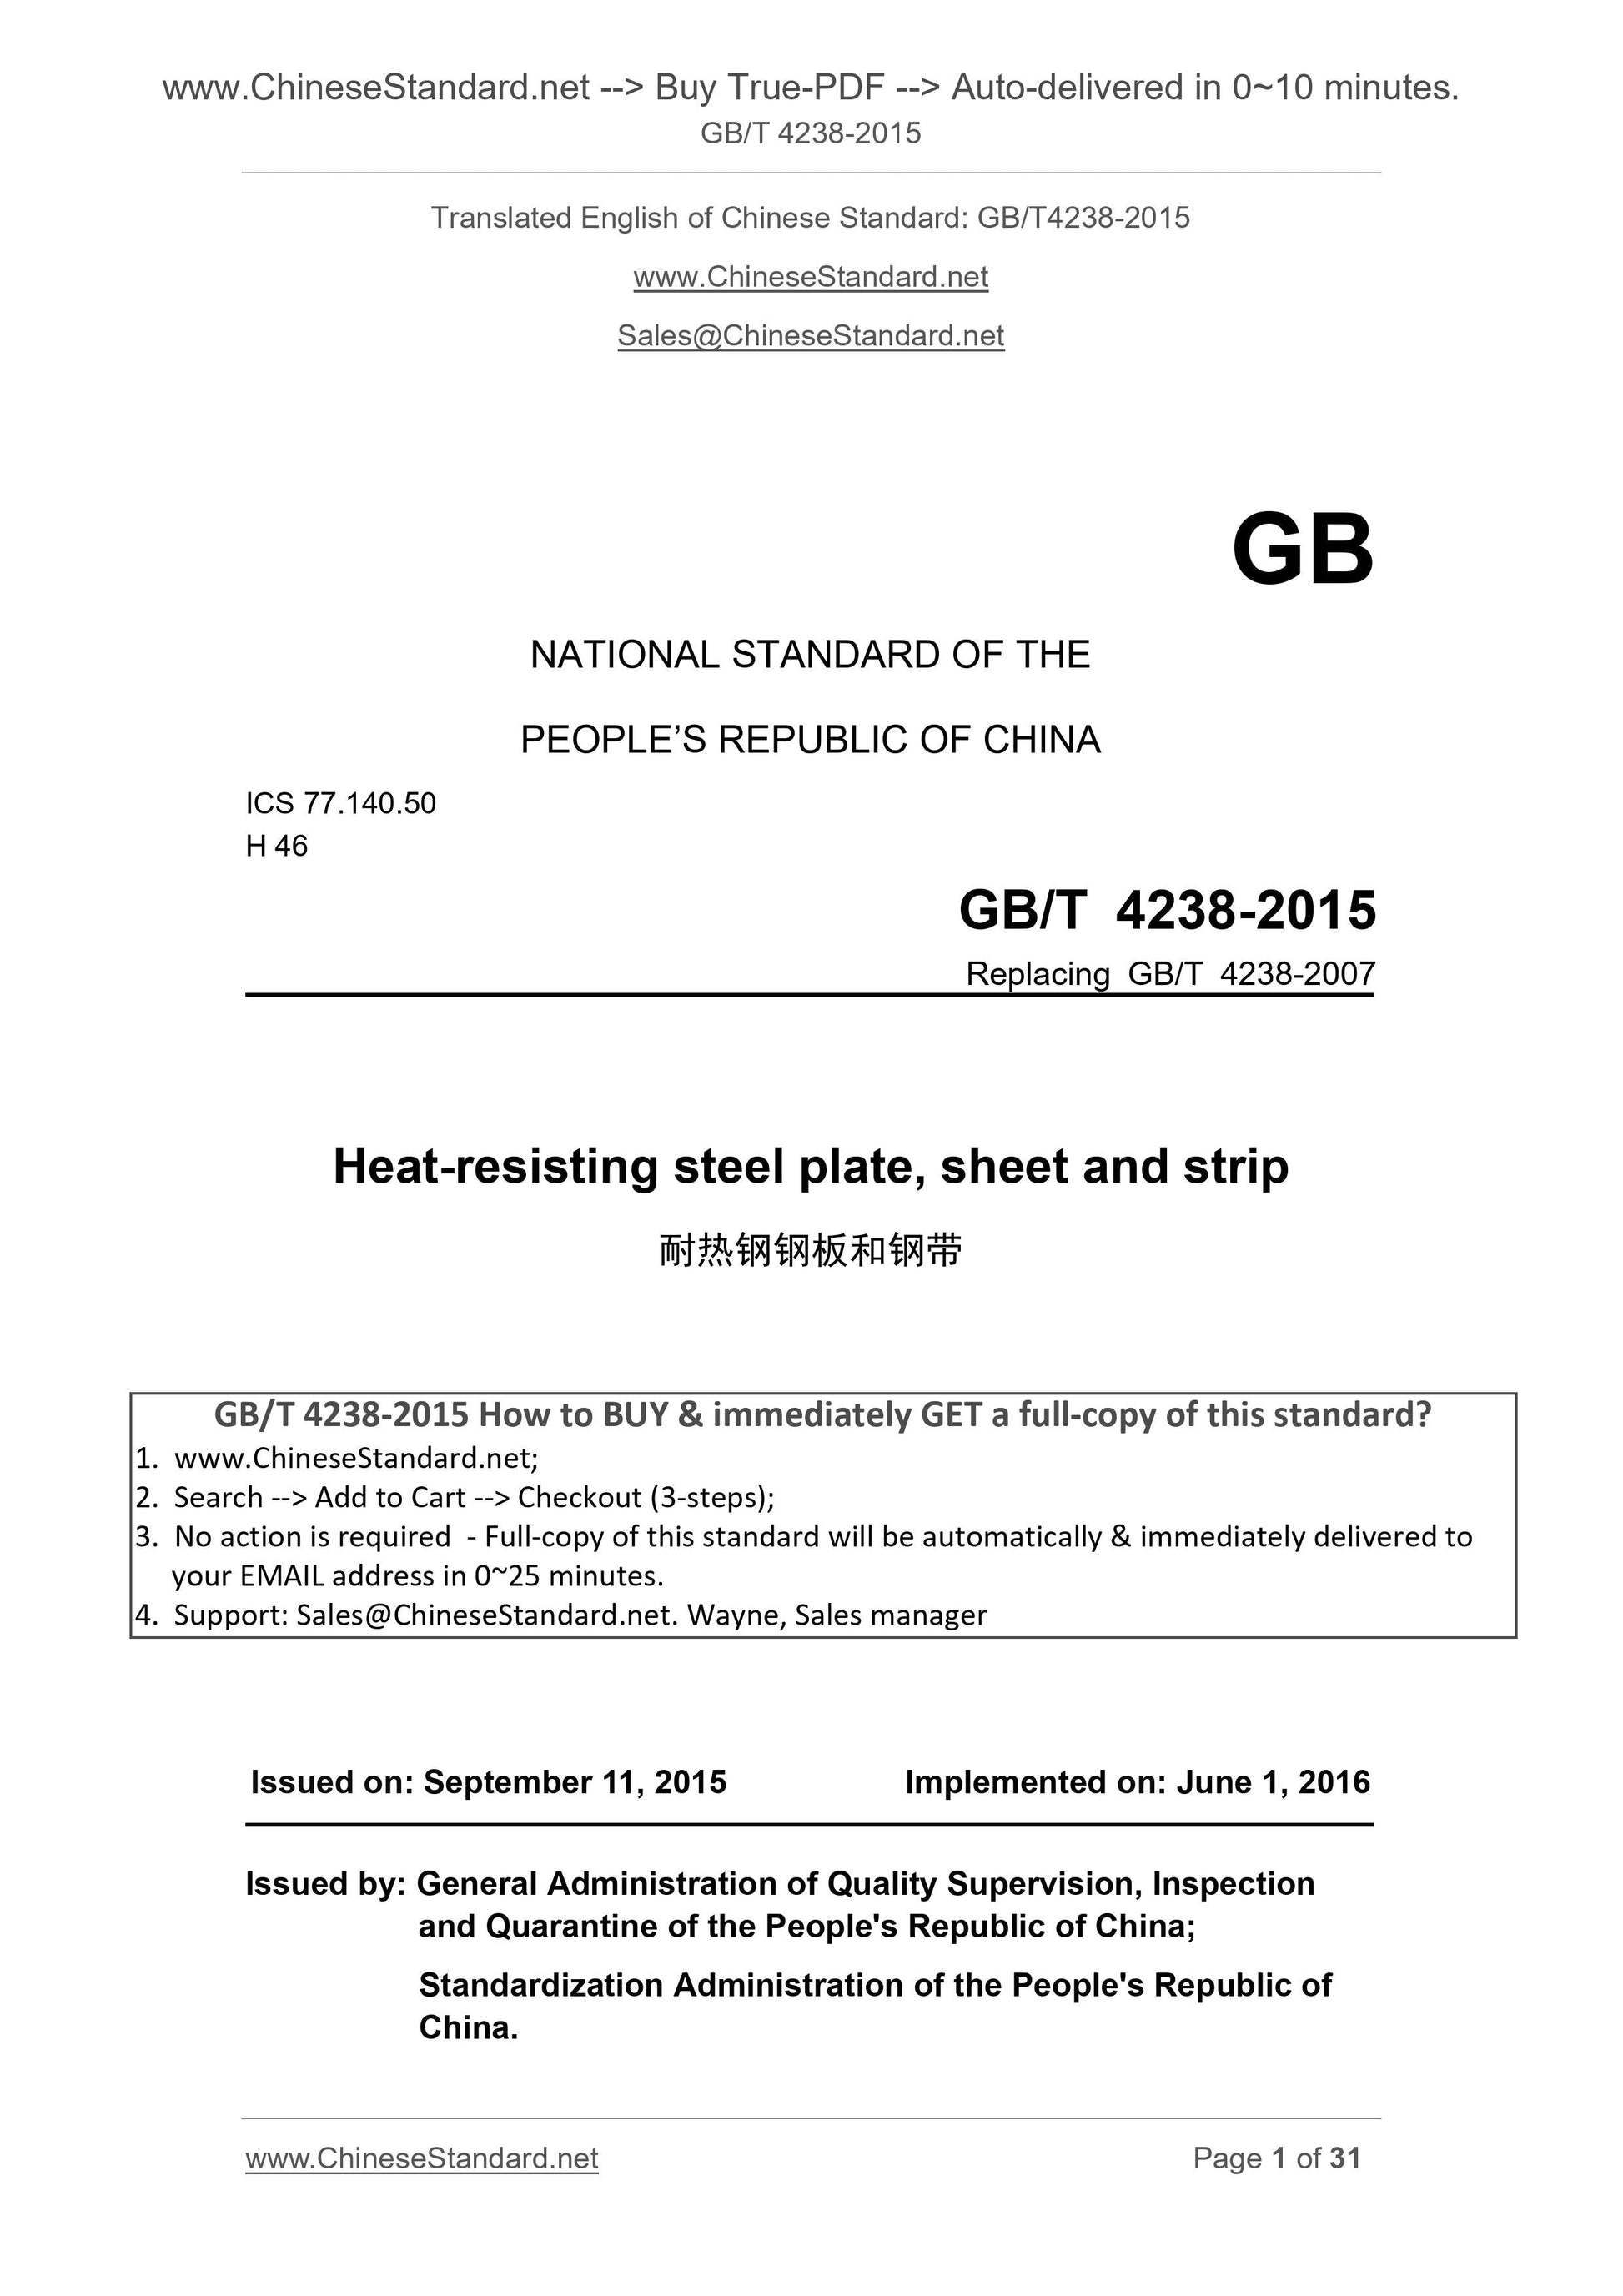 GB/T 4238-2015 Page 1